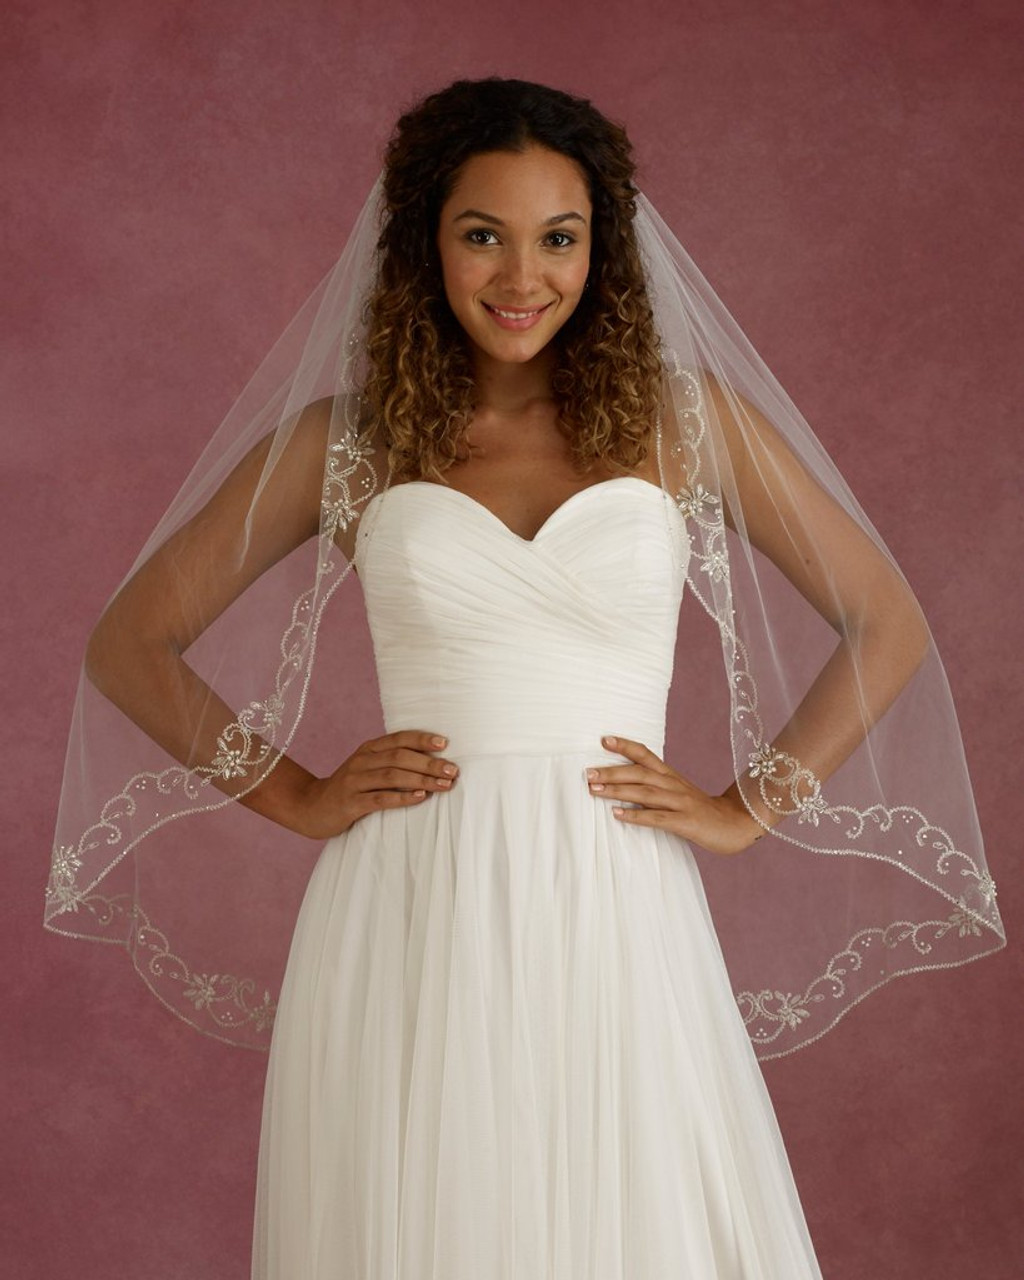 Marionat Bridal Veils 3661 - 42” Long modified scalloped beaded embroidered design with pearls and rhinestones